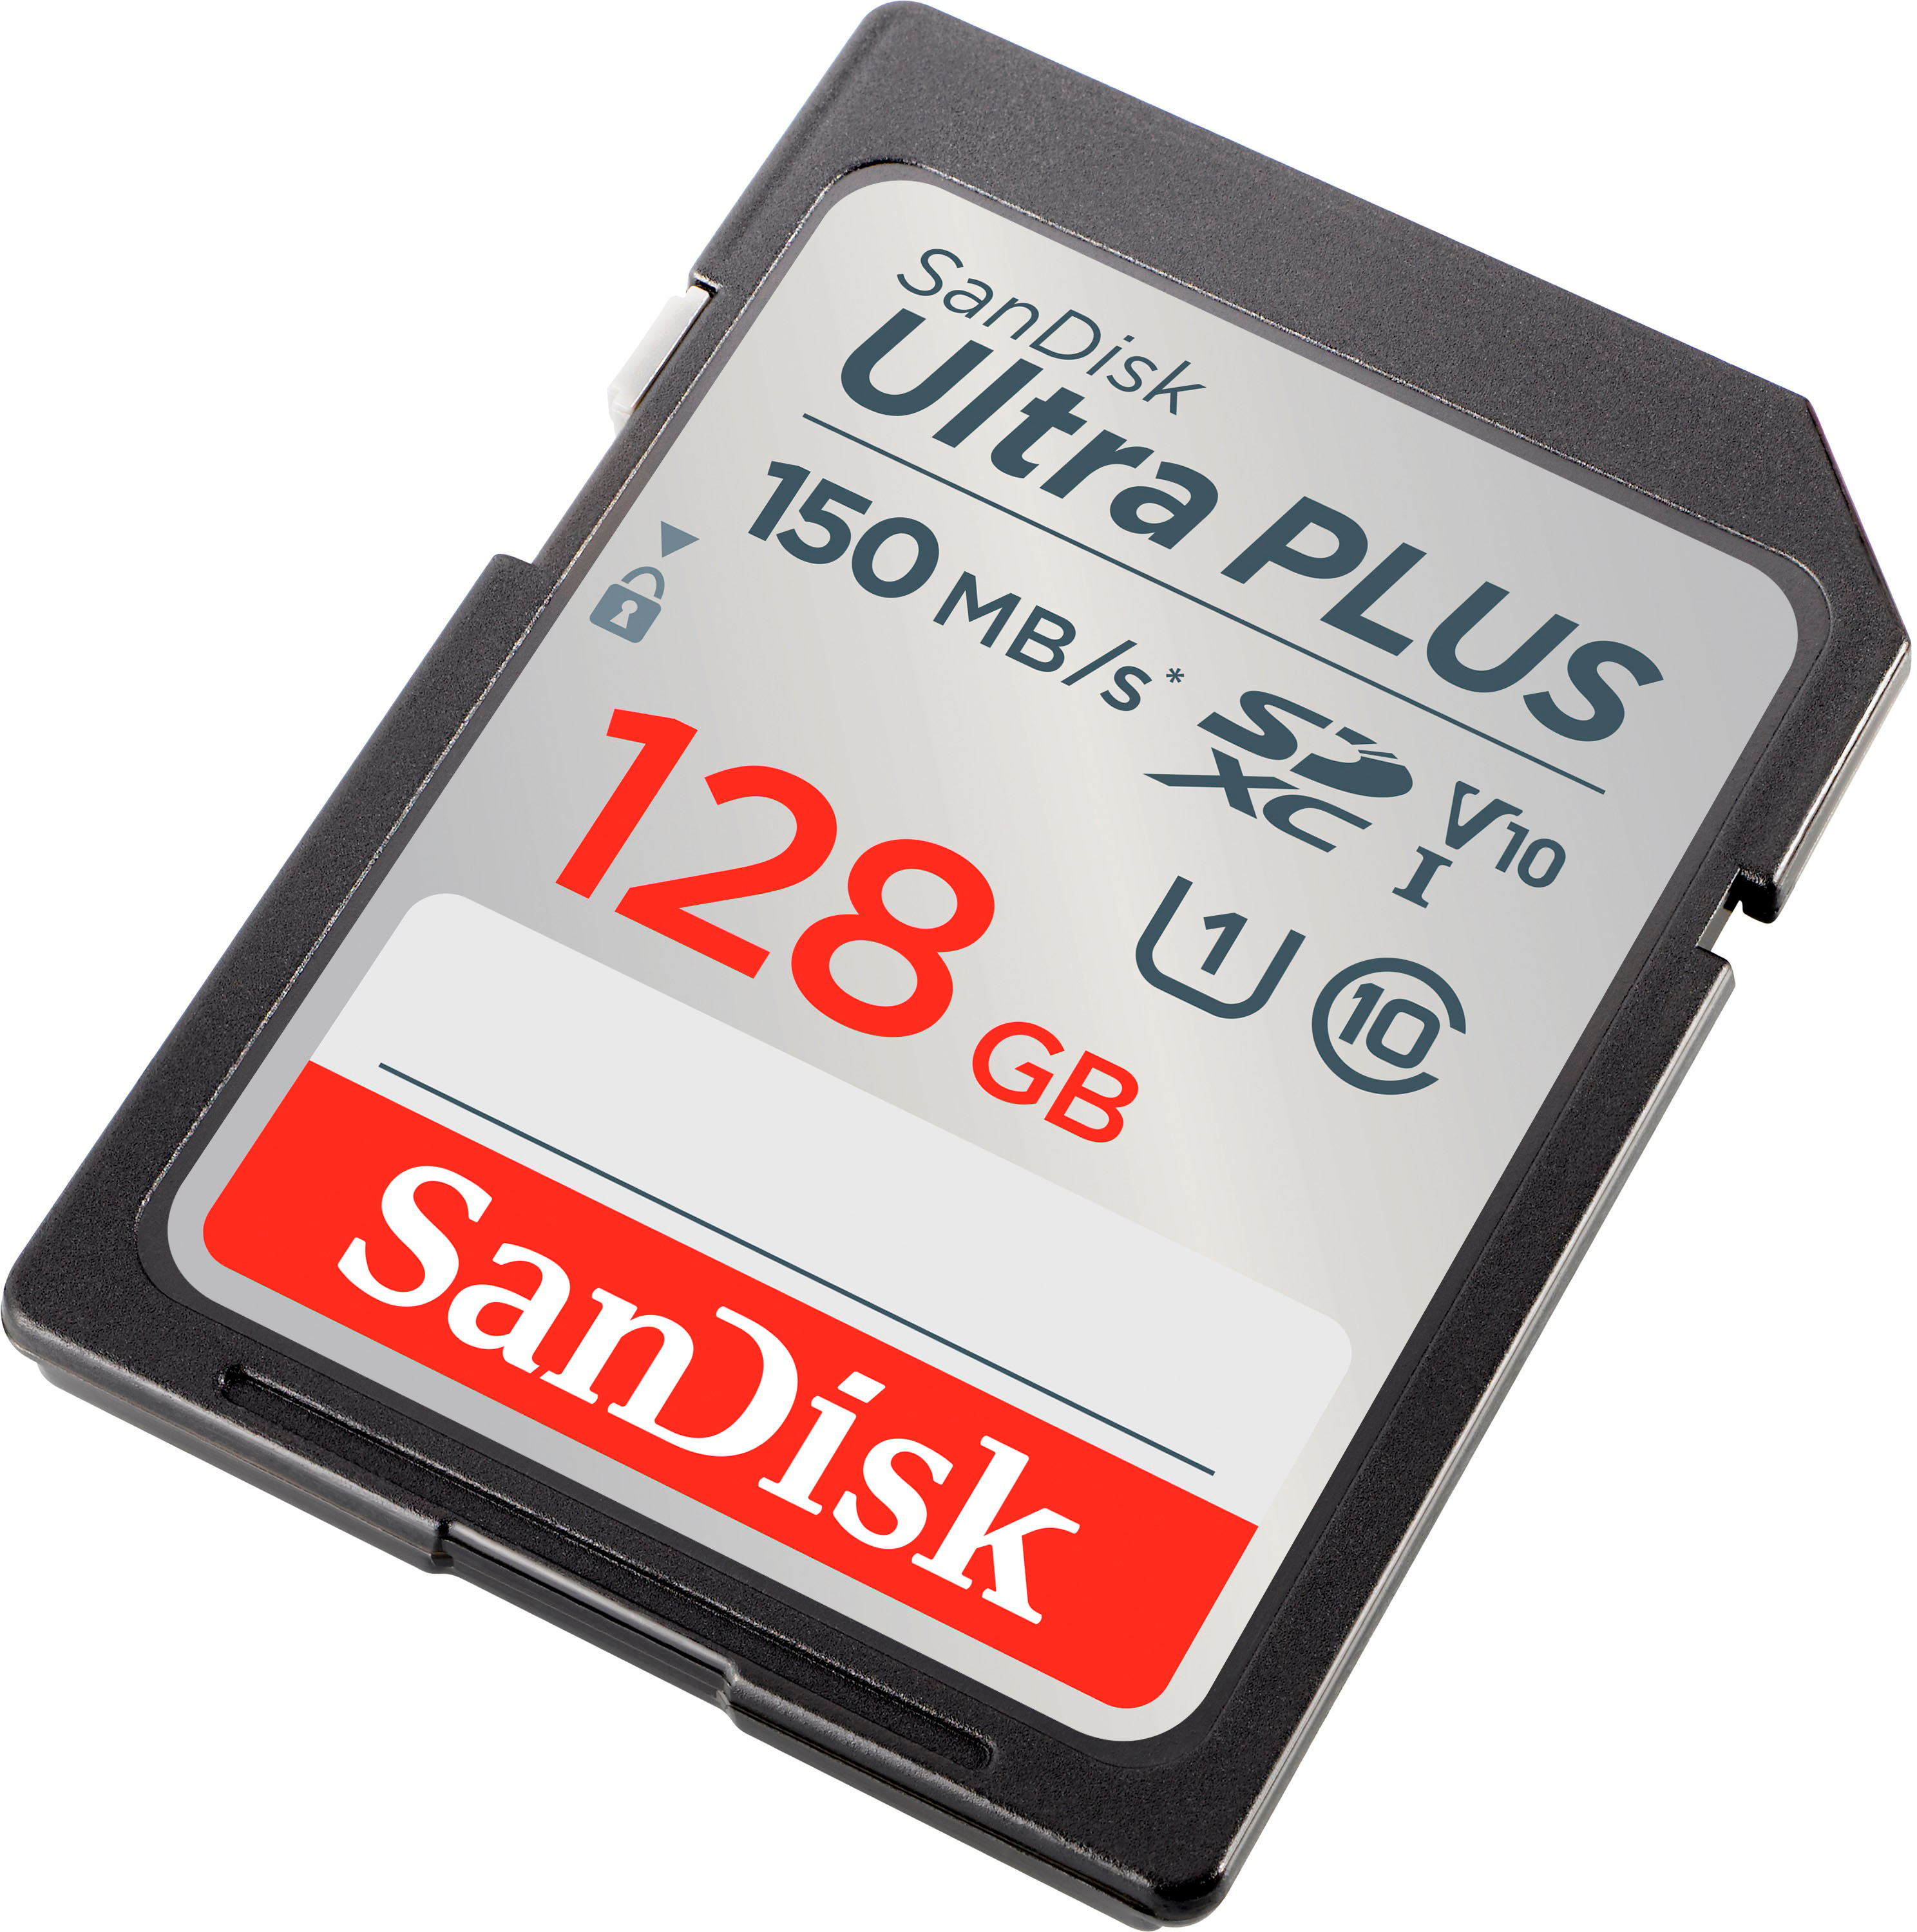 What's The Difference Between SanDisk Ultra Vs Extreme?